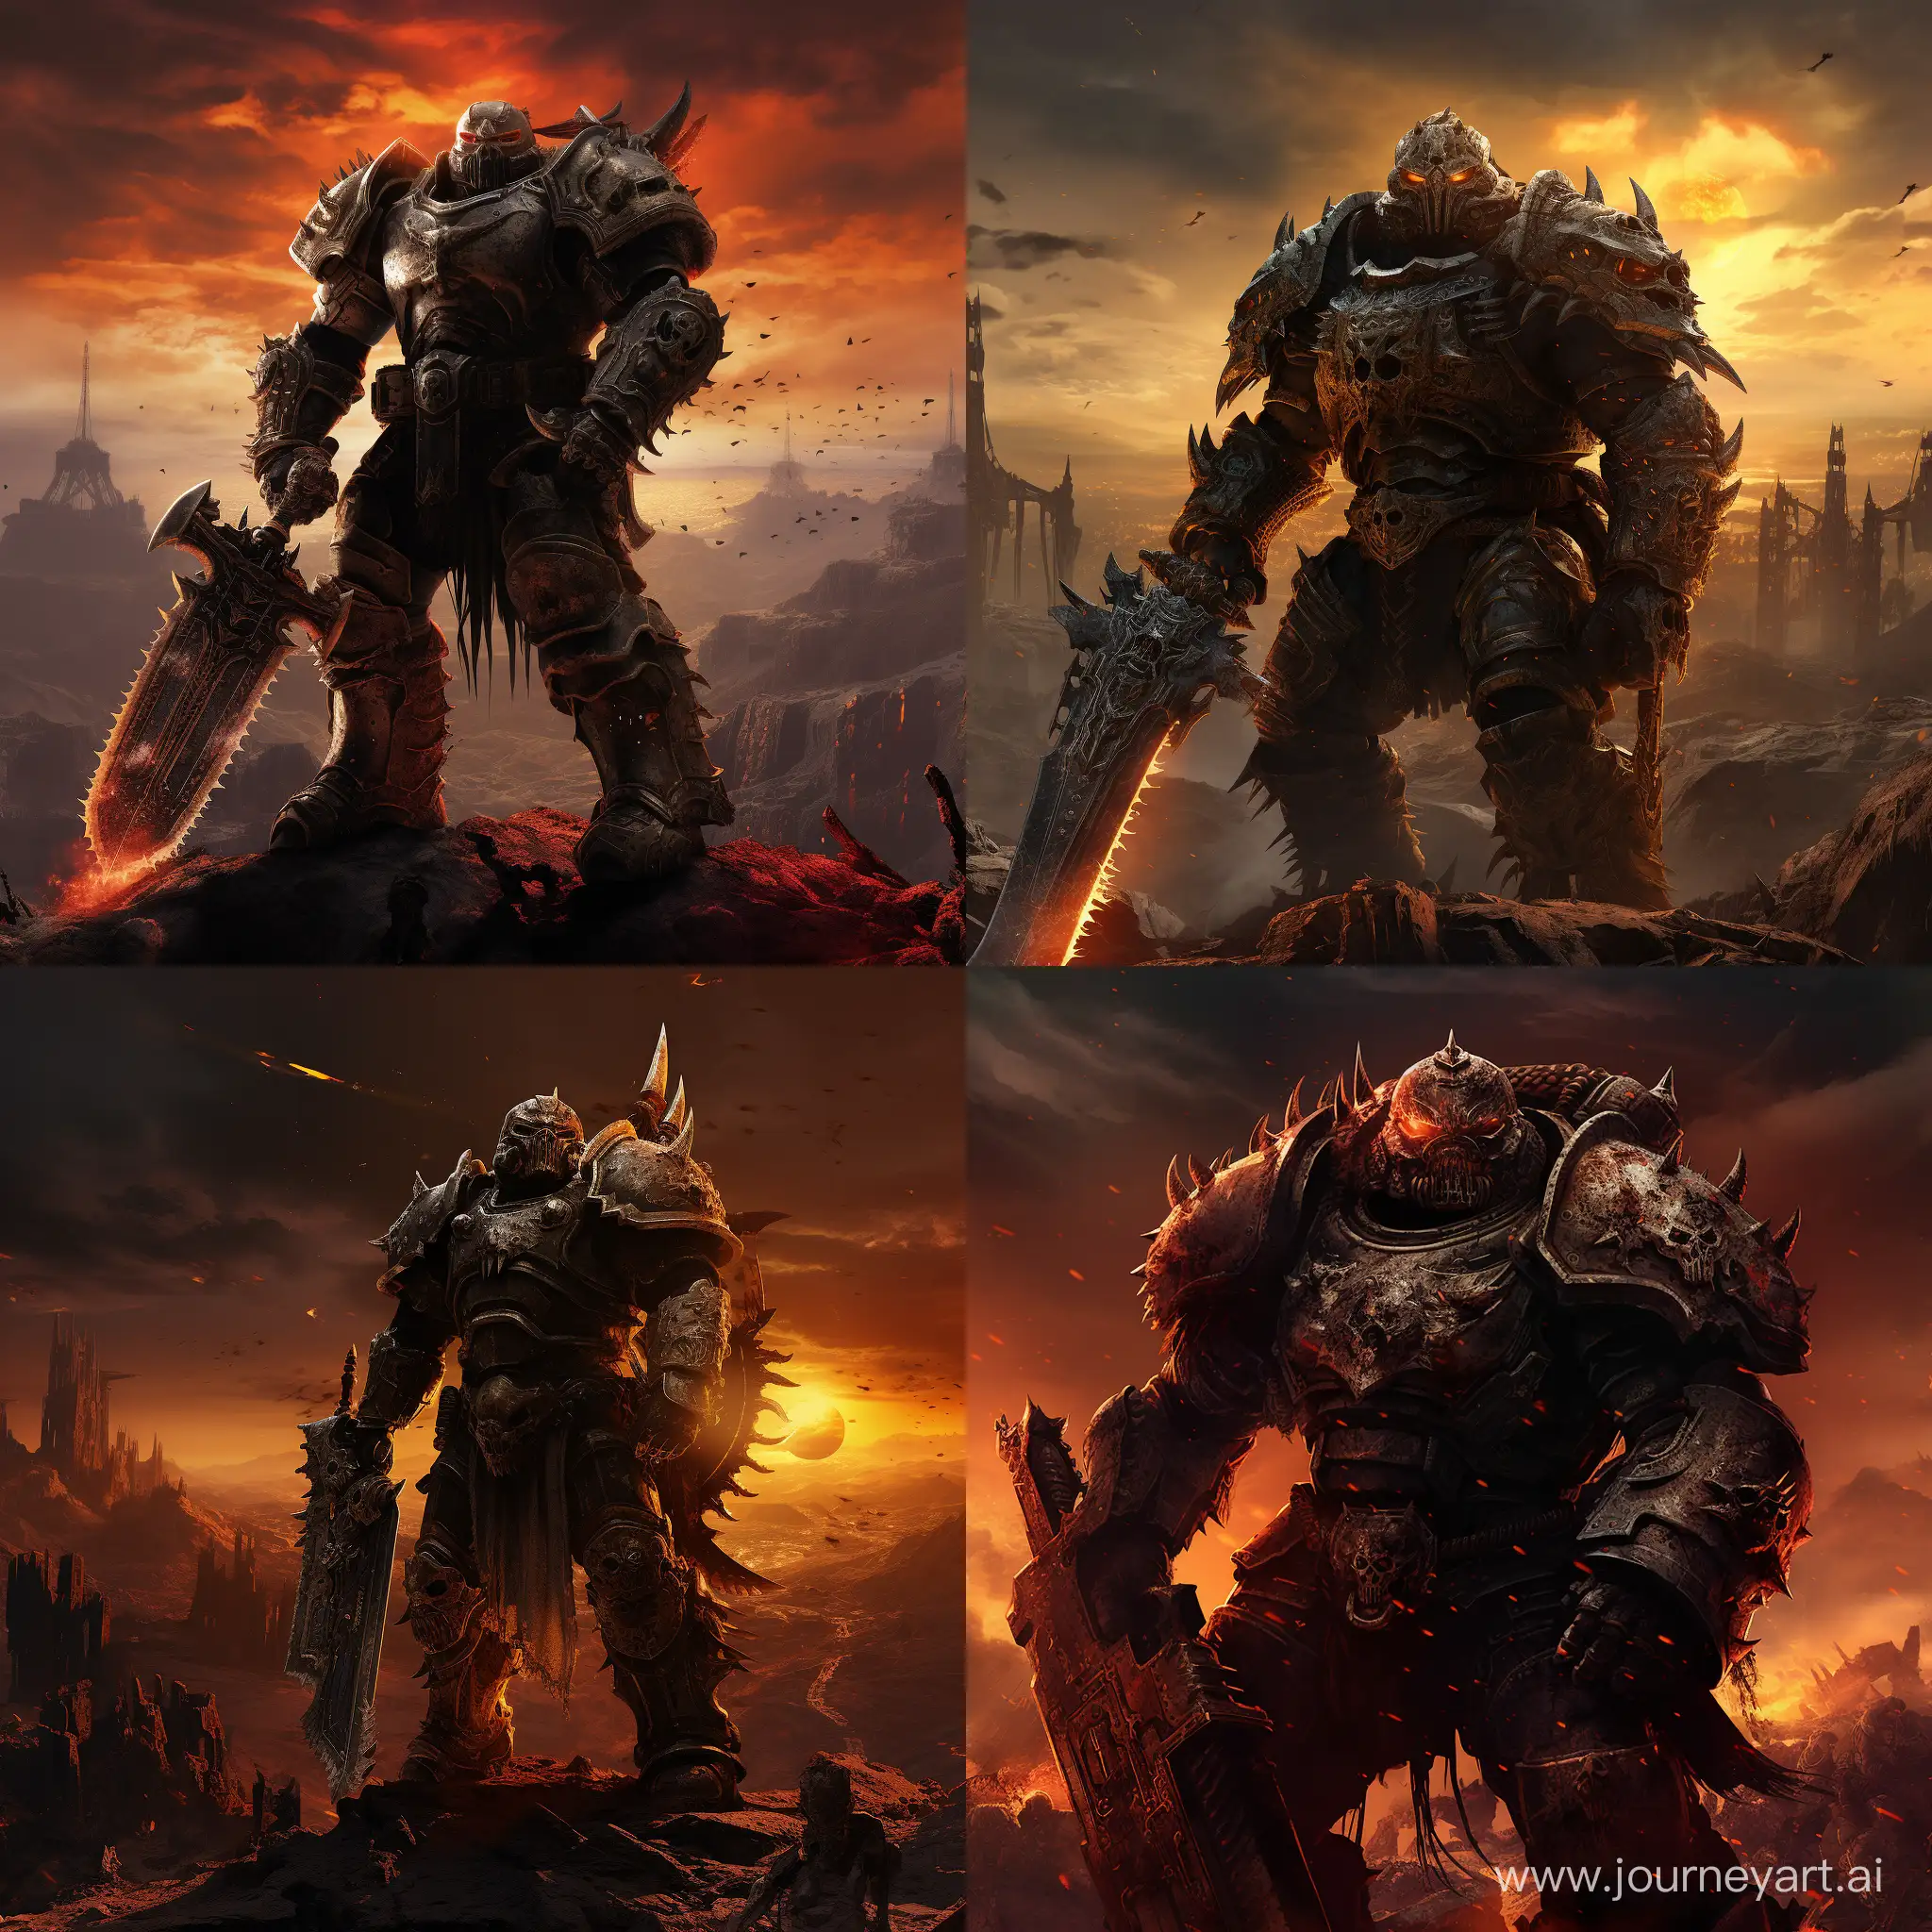 "Amidst the desolate ruins of a war-torn city on a distant planet, a towering Space Marine clad in ornate, battle-worn power armor raises a relic blade high above his head. The sky is ablaze with the eerie glow of distant explosions, casting long shadows across the broken landscape. Surrounding the Space Marine are the remnants of his squad, each warrior standing defiantly against the encroaching horde of grotesque alien creatures known as Tyranids. In the foreground, a twisted, mutated monstrosity emerges from the darkness, its acidic saliva dripping as it lunges towards the heroic defenders. The air is thick with tension and the stench of decay, encapsulating the grim and unyielding atmosphere of the 41st millennium."





